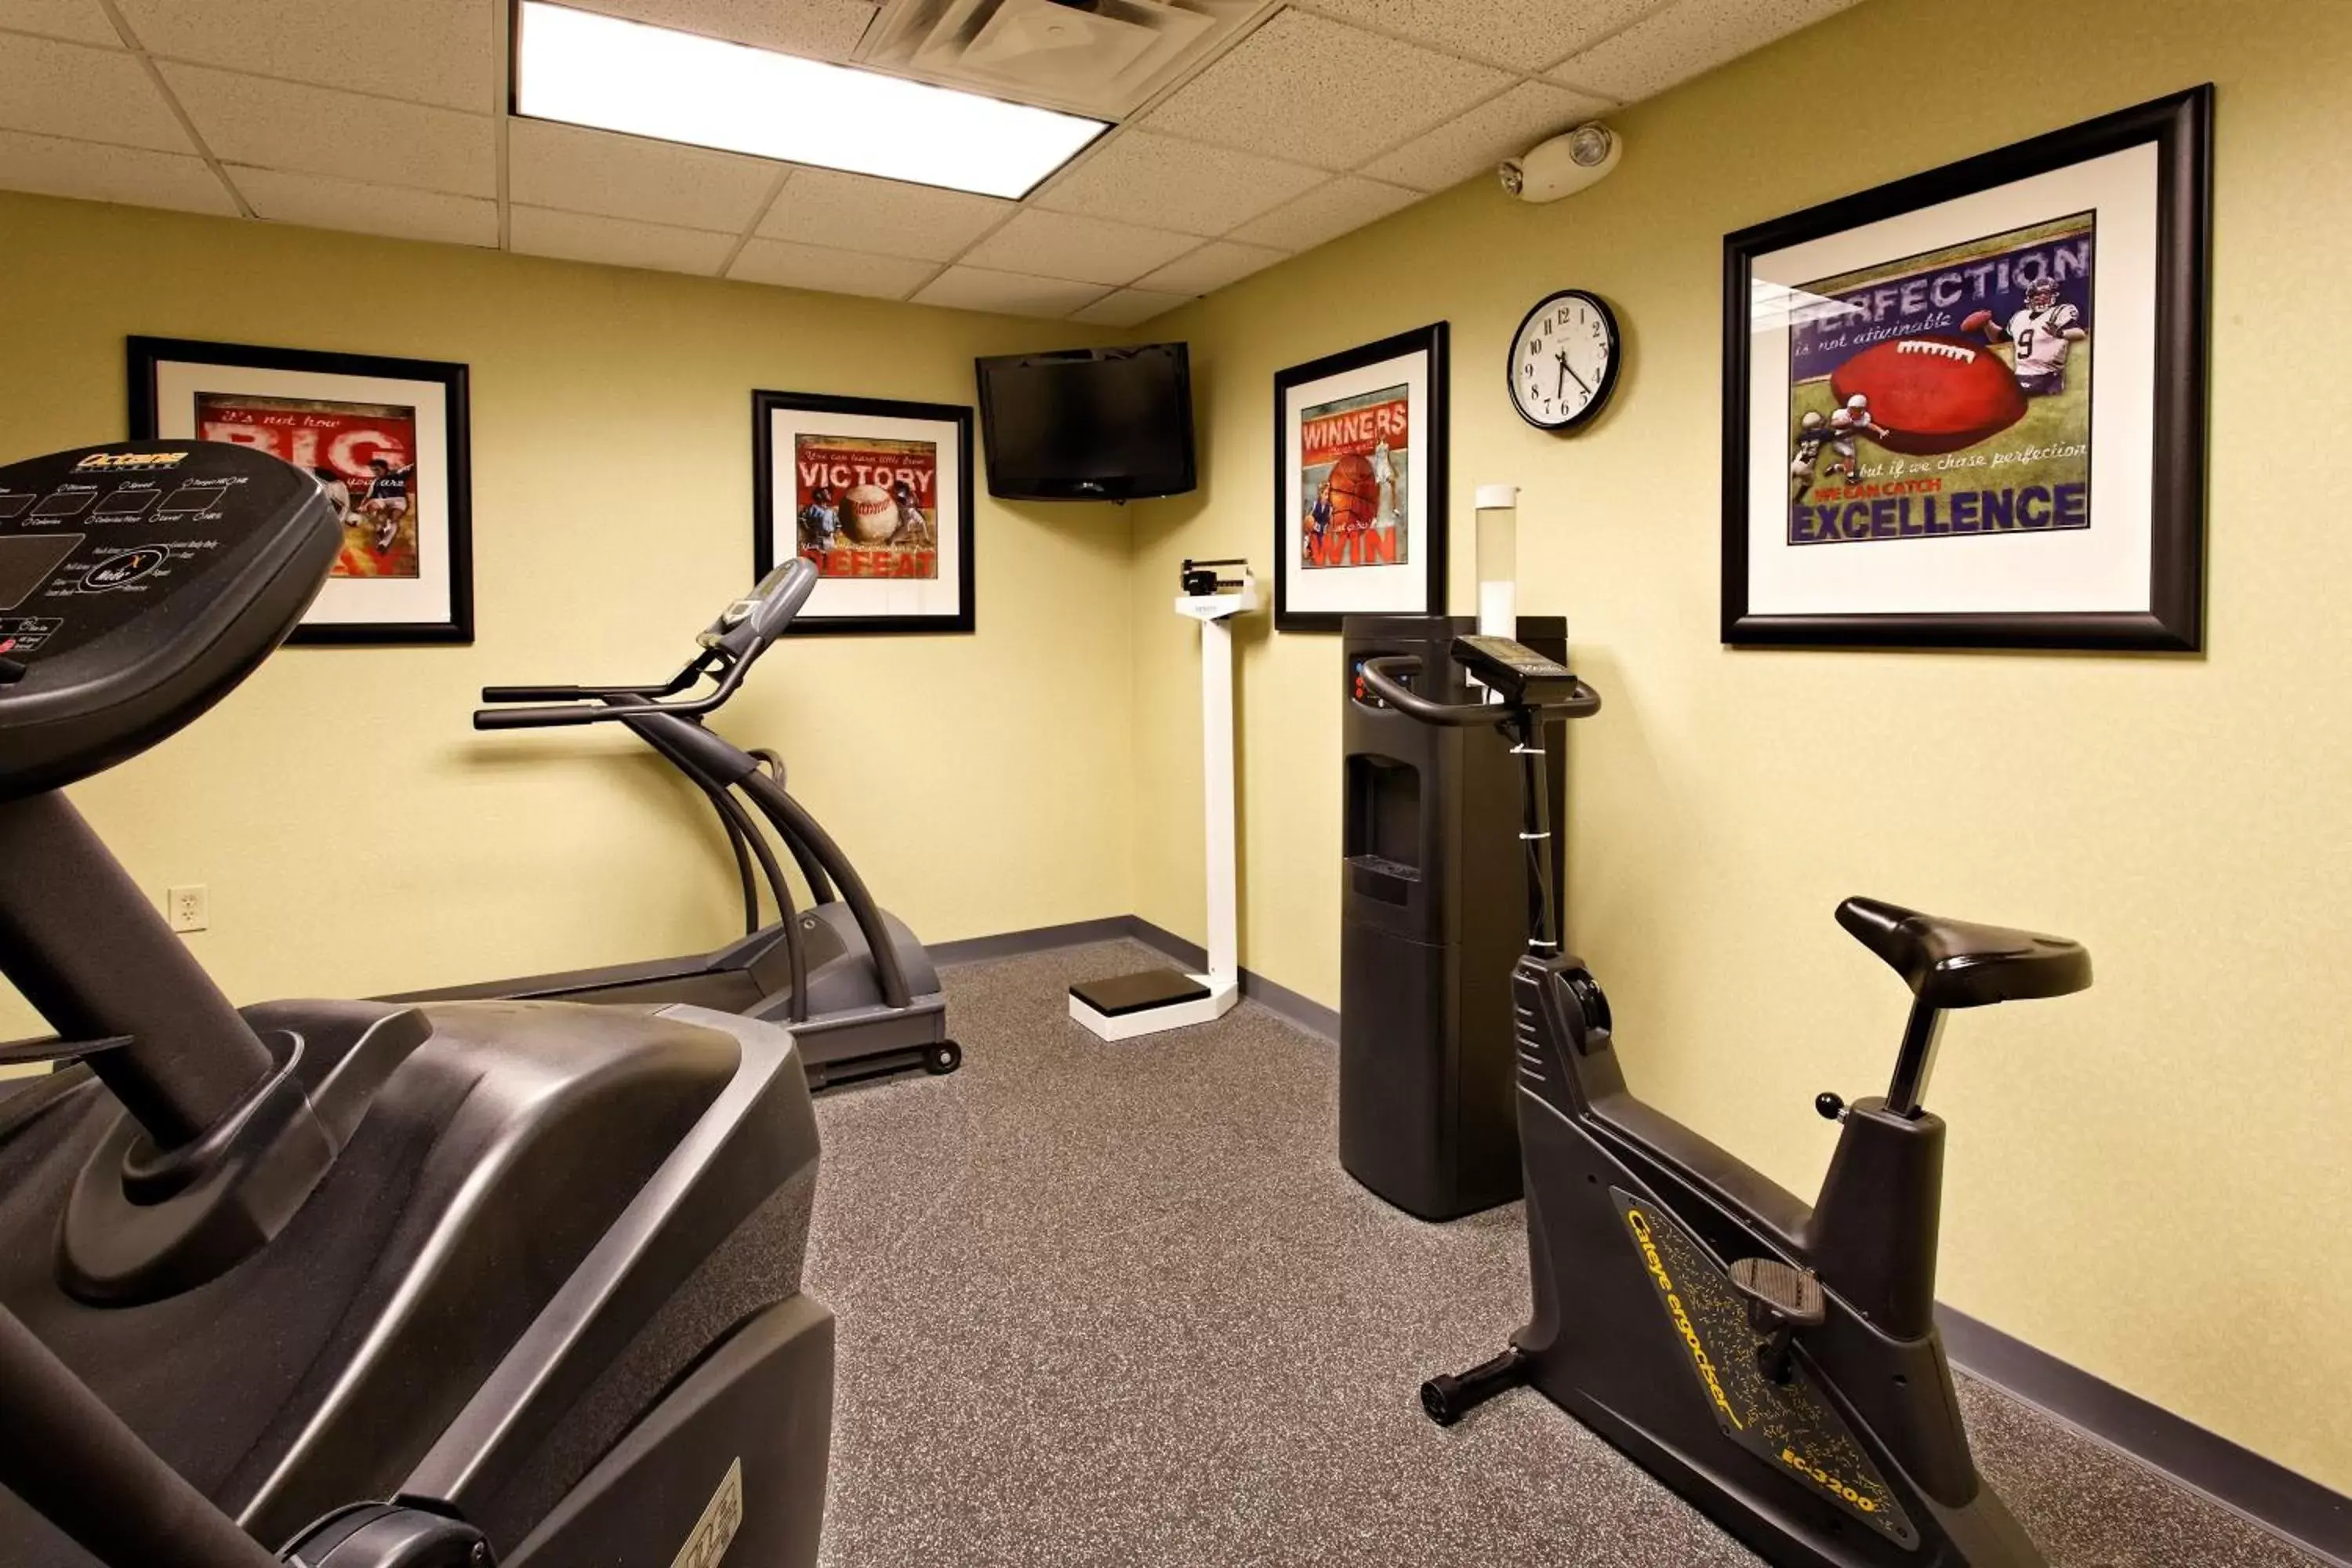 Fitness centre/facilities, Fitness Center/Facilities in Country Inn & Suites by Radisson, Evansville, IN